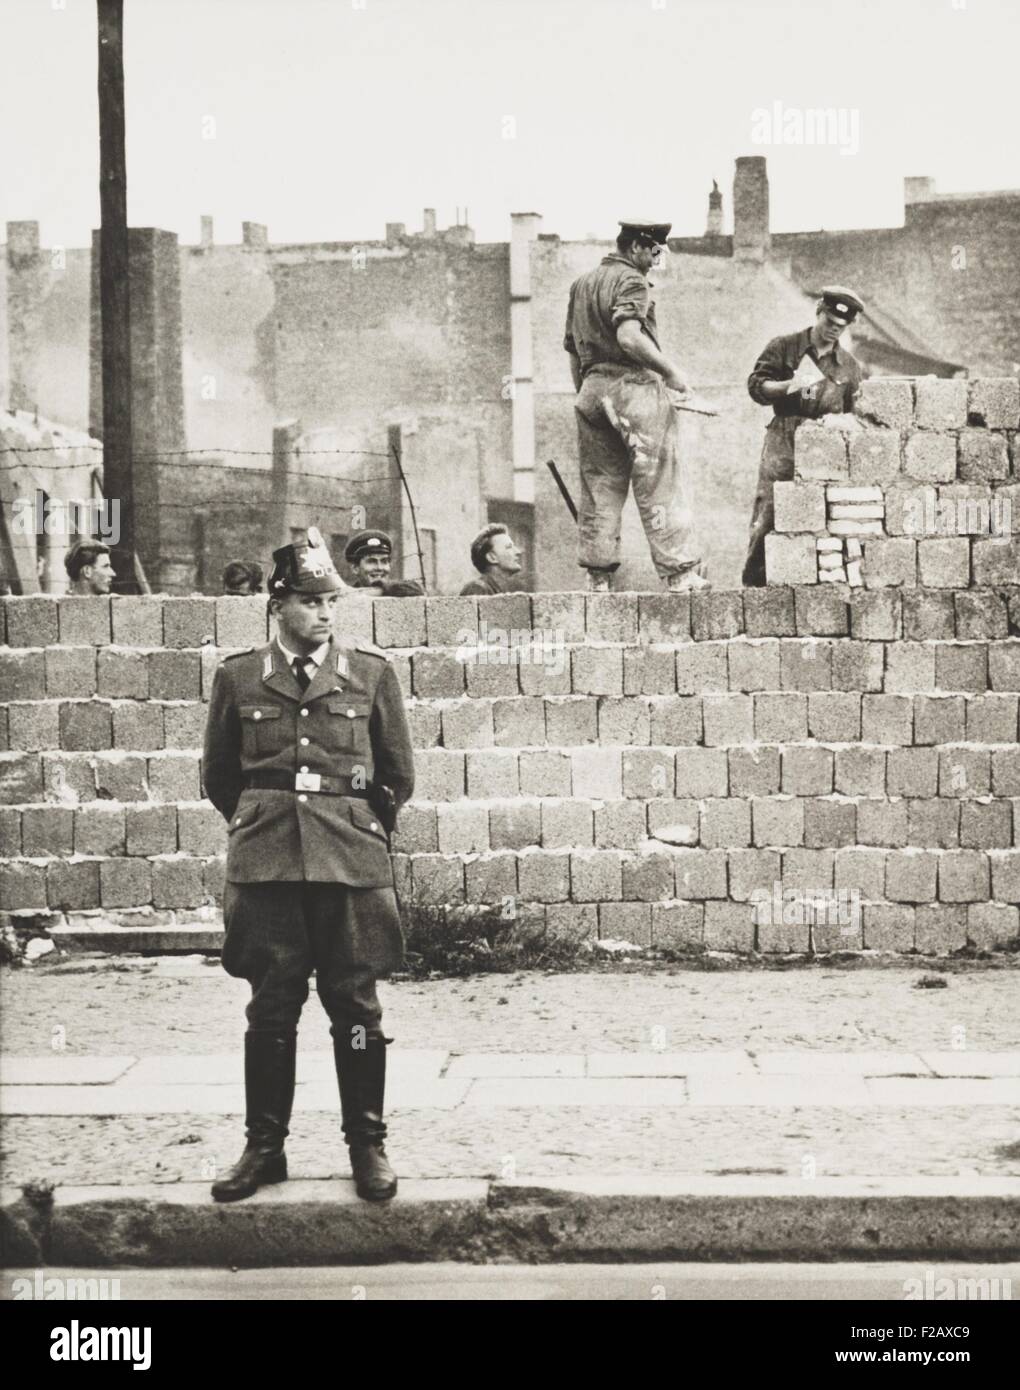 West Berlin policeman stands before the concrete block wall dividing East and West Berlin. Along Bernauer Strasse, East Berlin workmen add blocks to increase height of the barrier. Oct. 11, 1961. (BSLOC 2015 2 265) Stock Photo